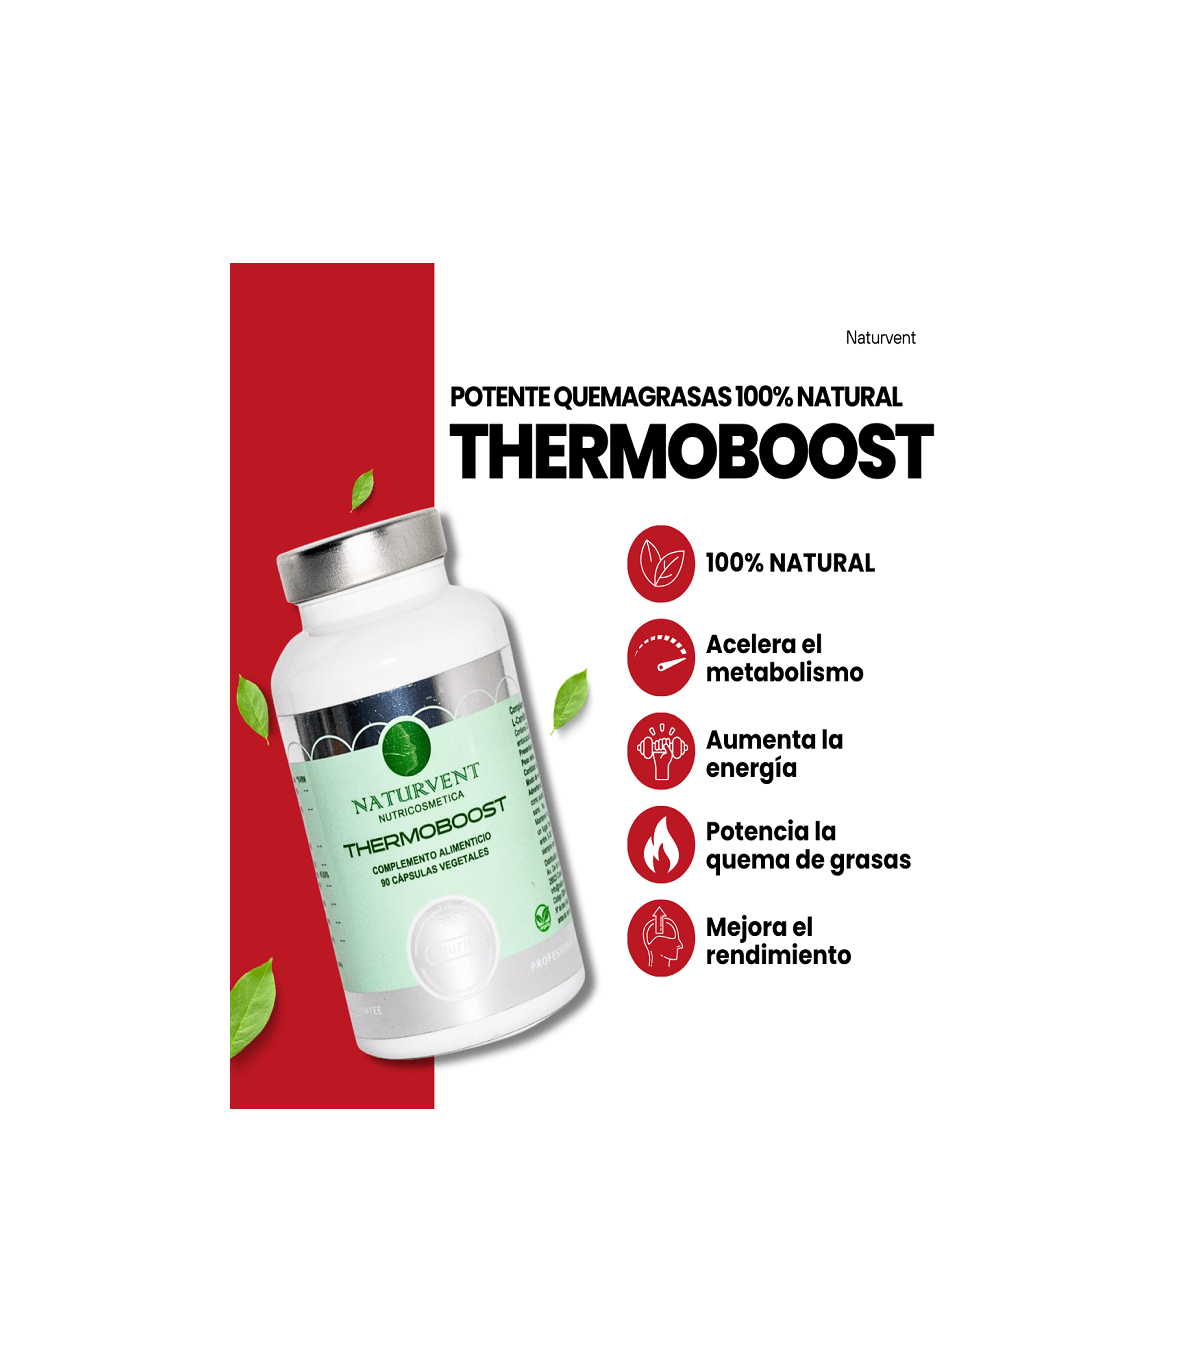 THERMOBOOST Potente Quemagrasas.